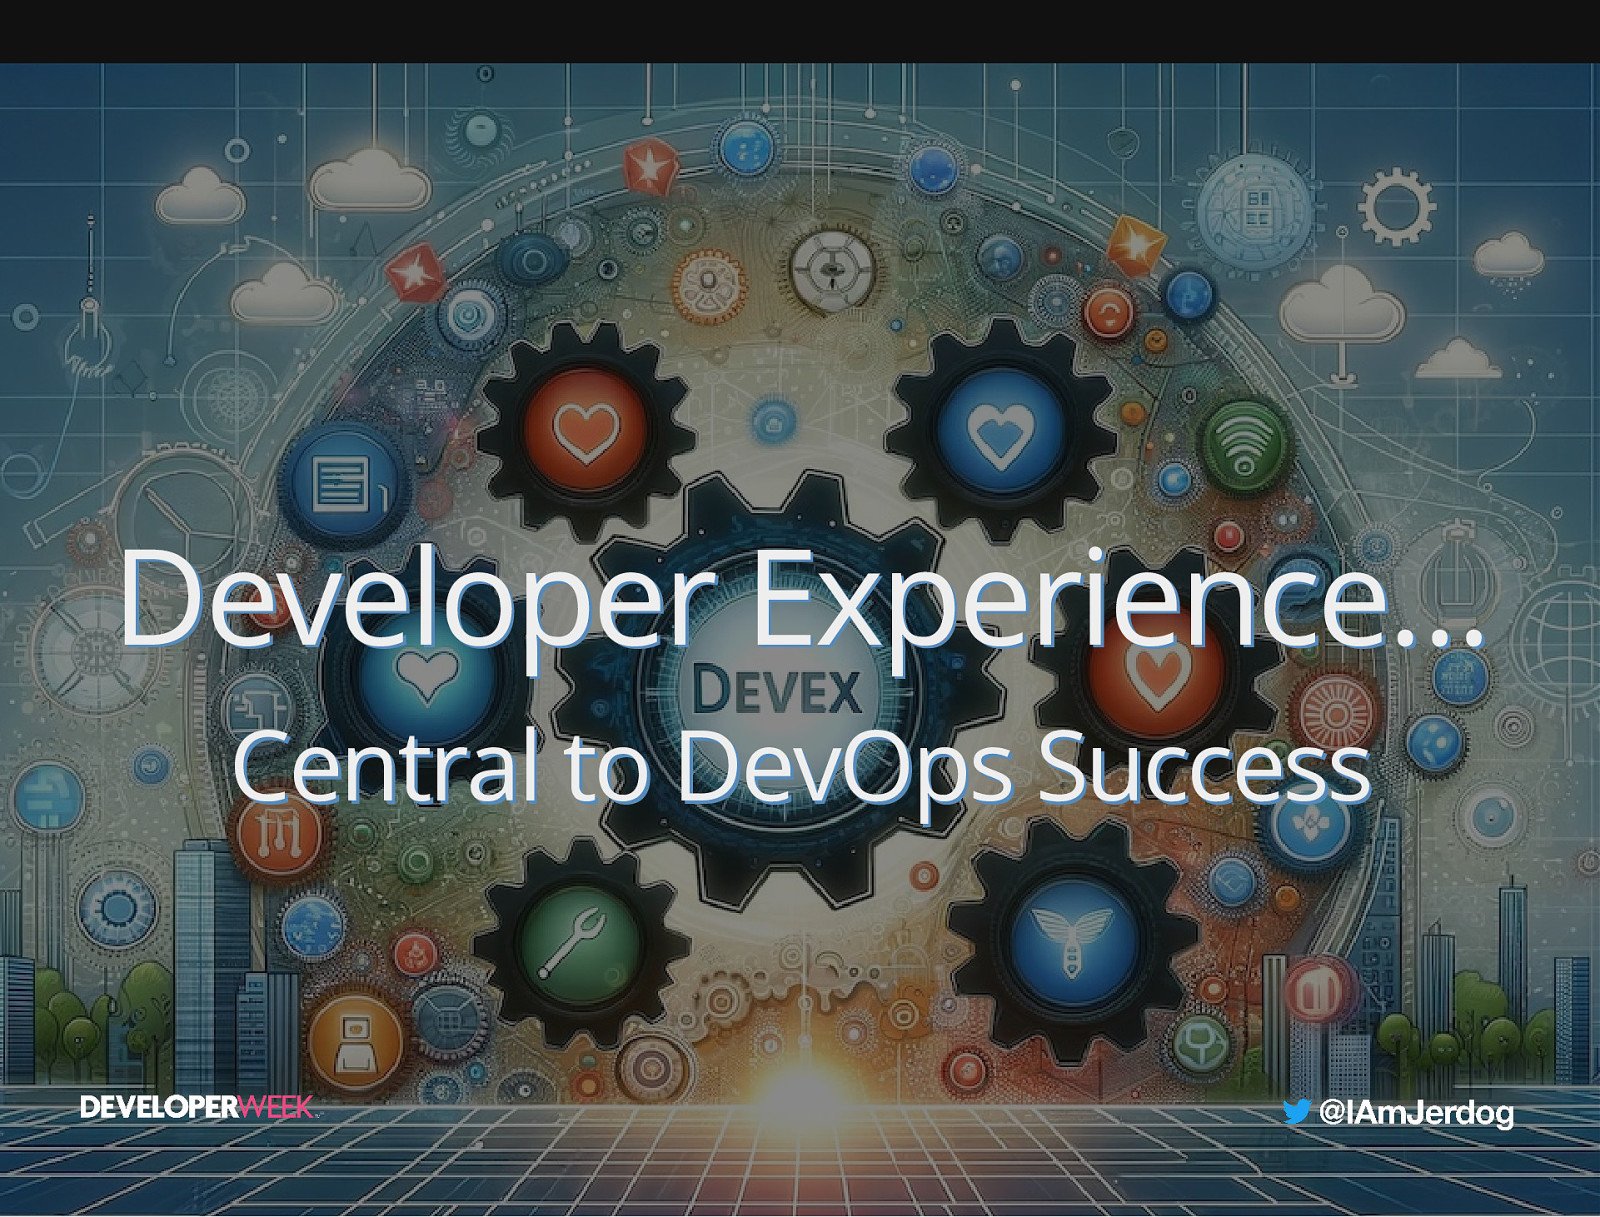 Developer Experience is central to DevOps success